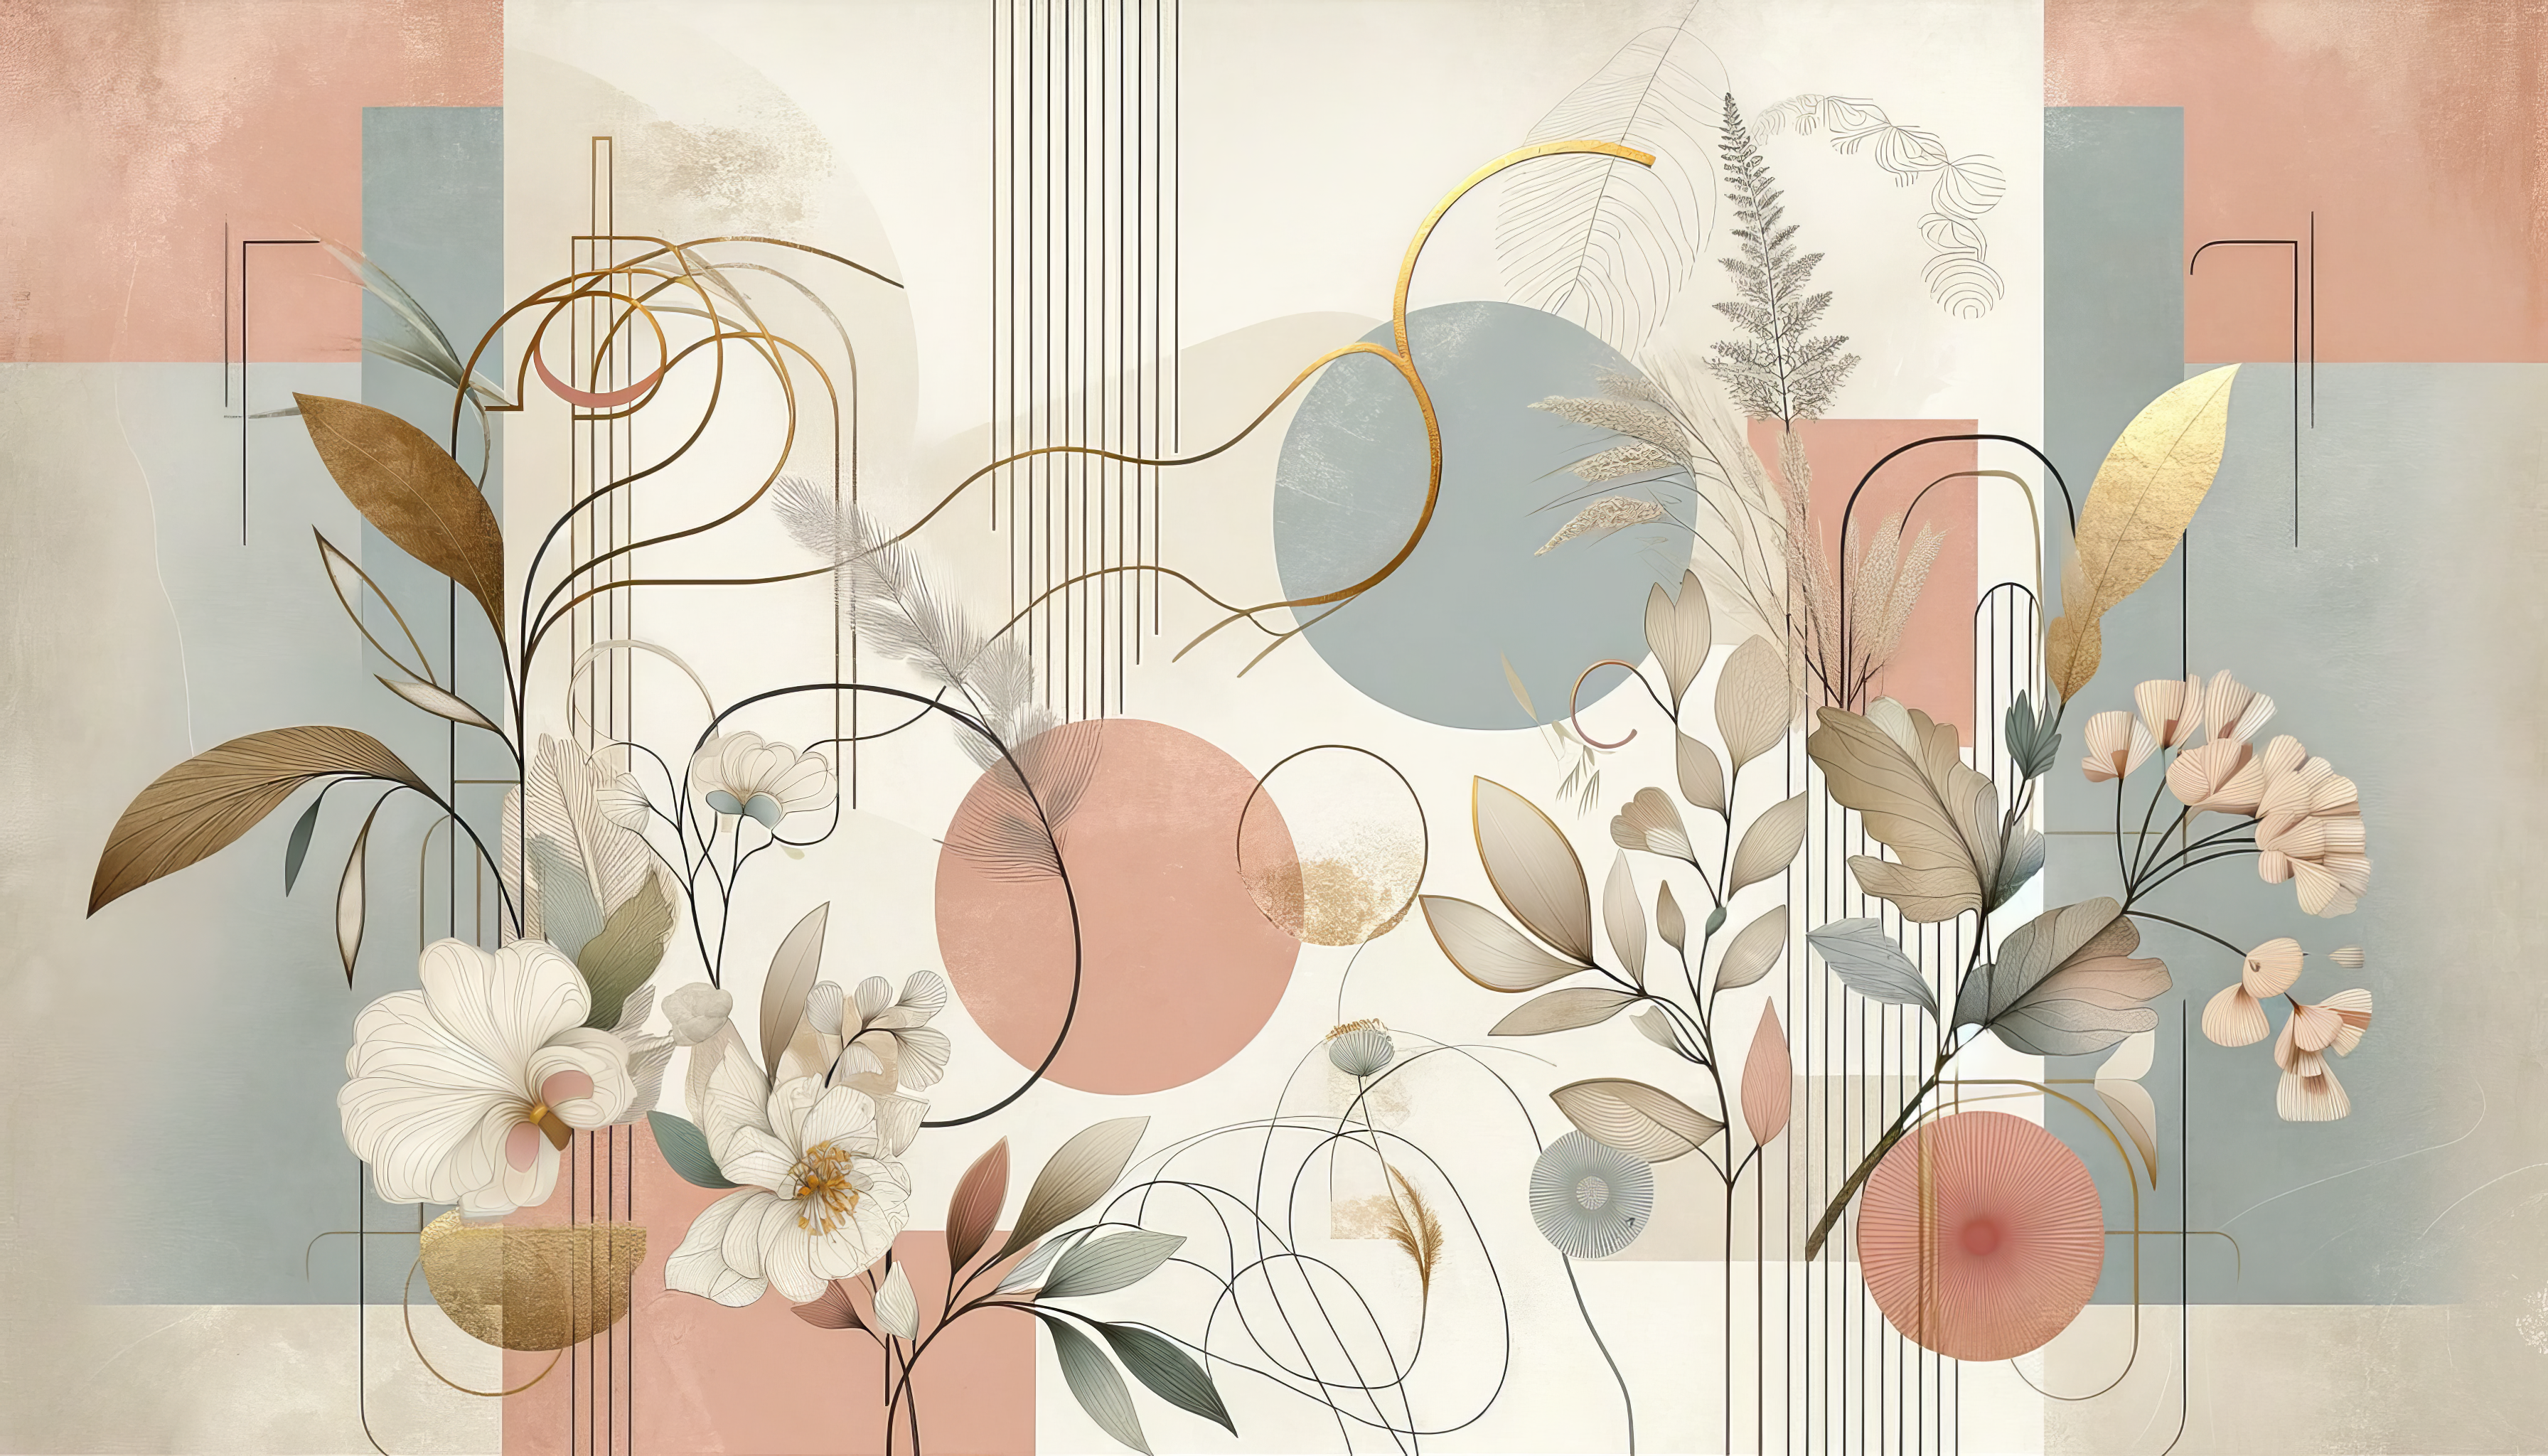 Abstract floral and geometric shapes wallpaper in pastel colors for desktop HD background.